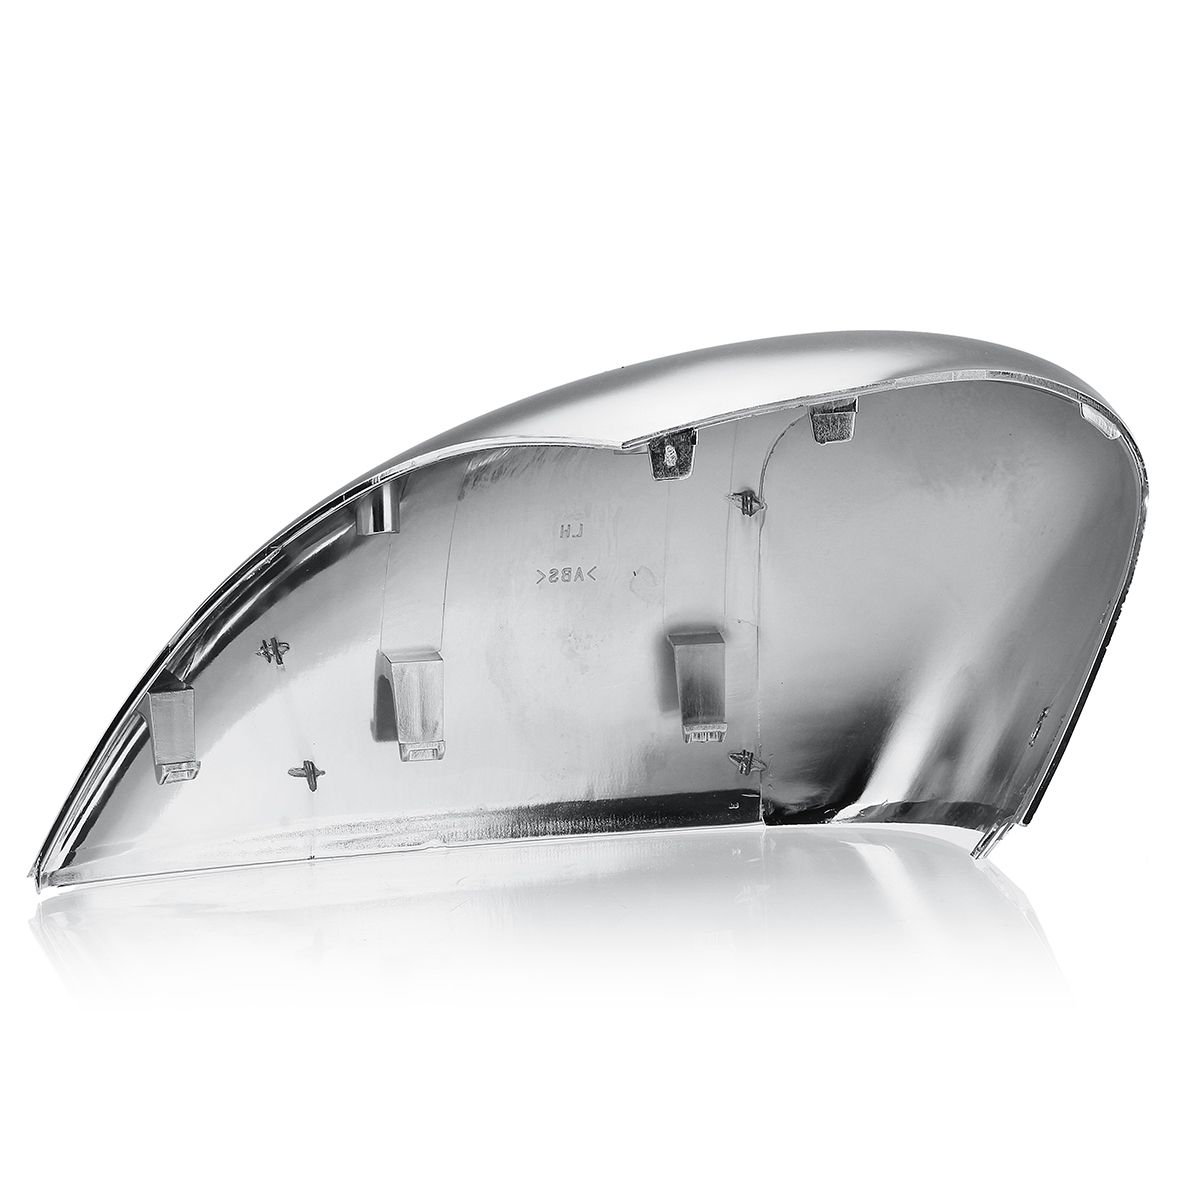 Chrome-Light-Car-Door-Rearview-Wing-Mirror-Cover-Cap-LeftRight-For-Ford-Fiesta-MK7-2008-2017-1639565